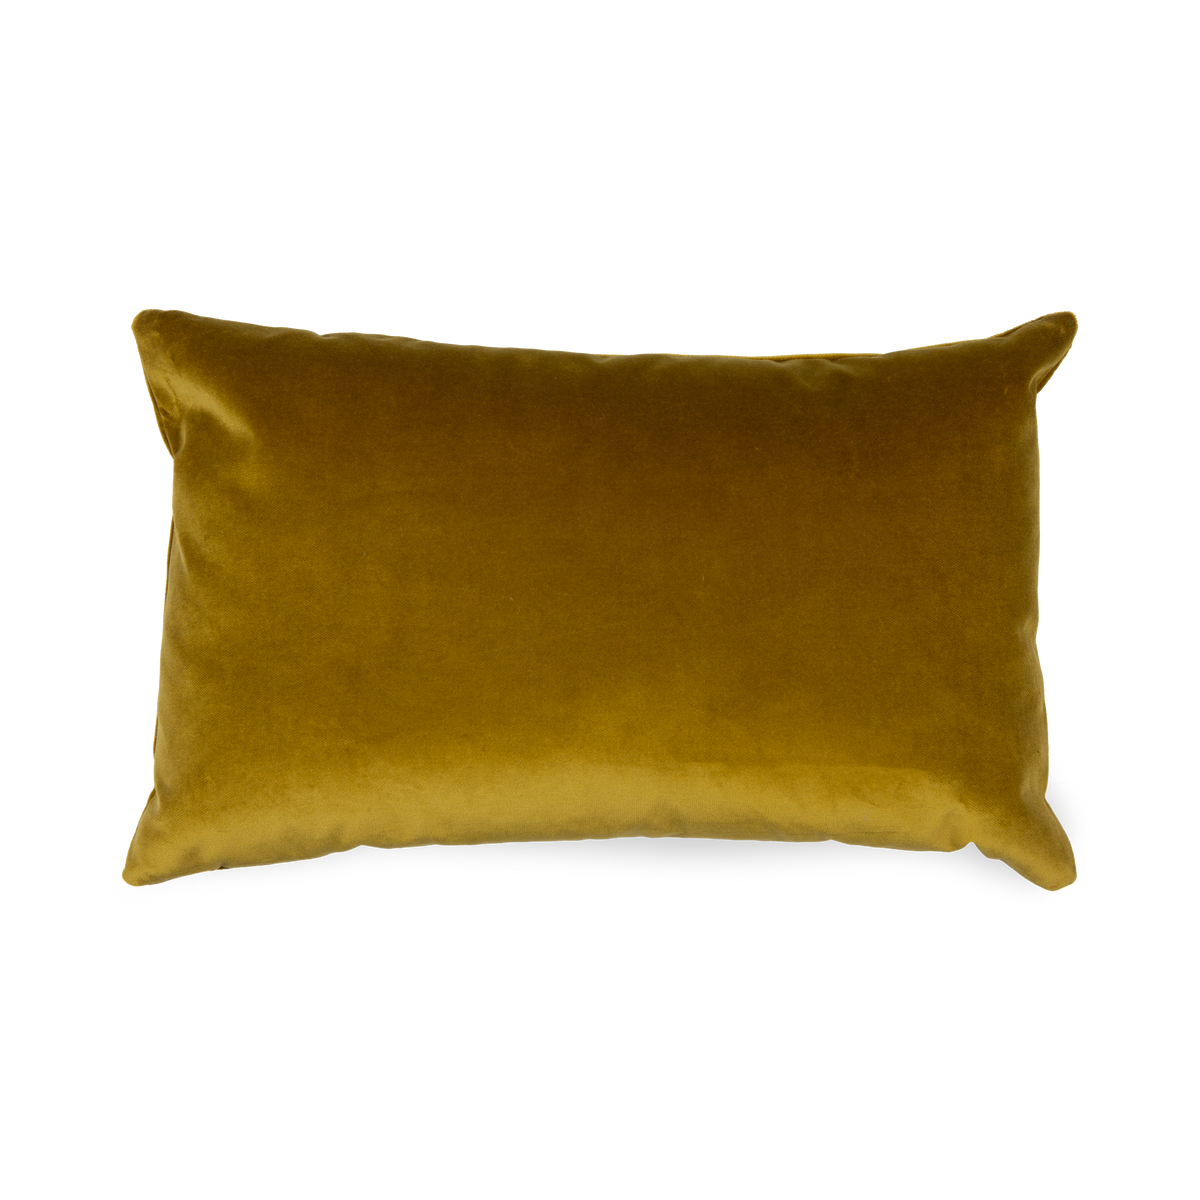 The Como Velvet Pillow is cotton velvet with a smooth texture and a lustrous finish.